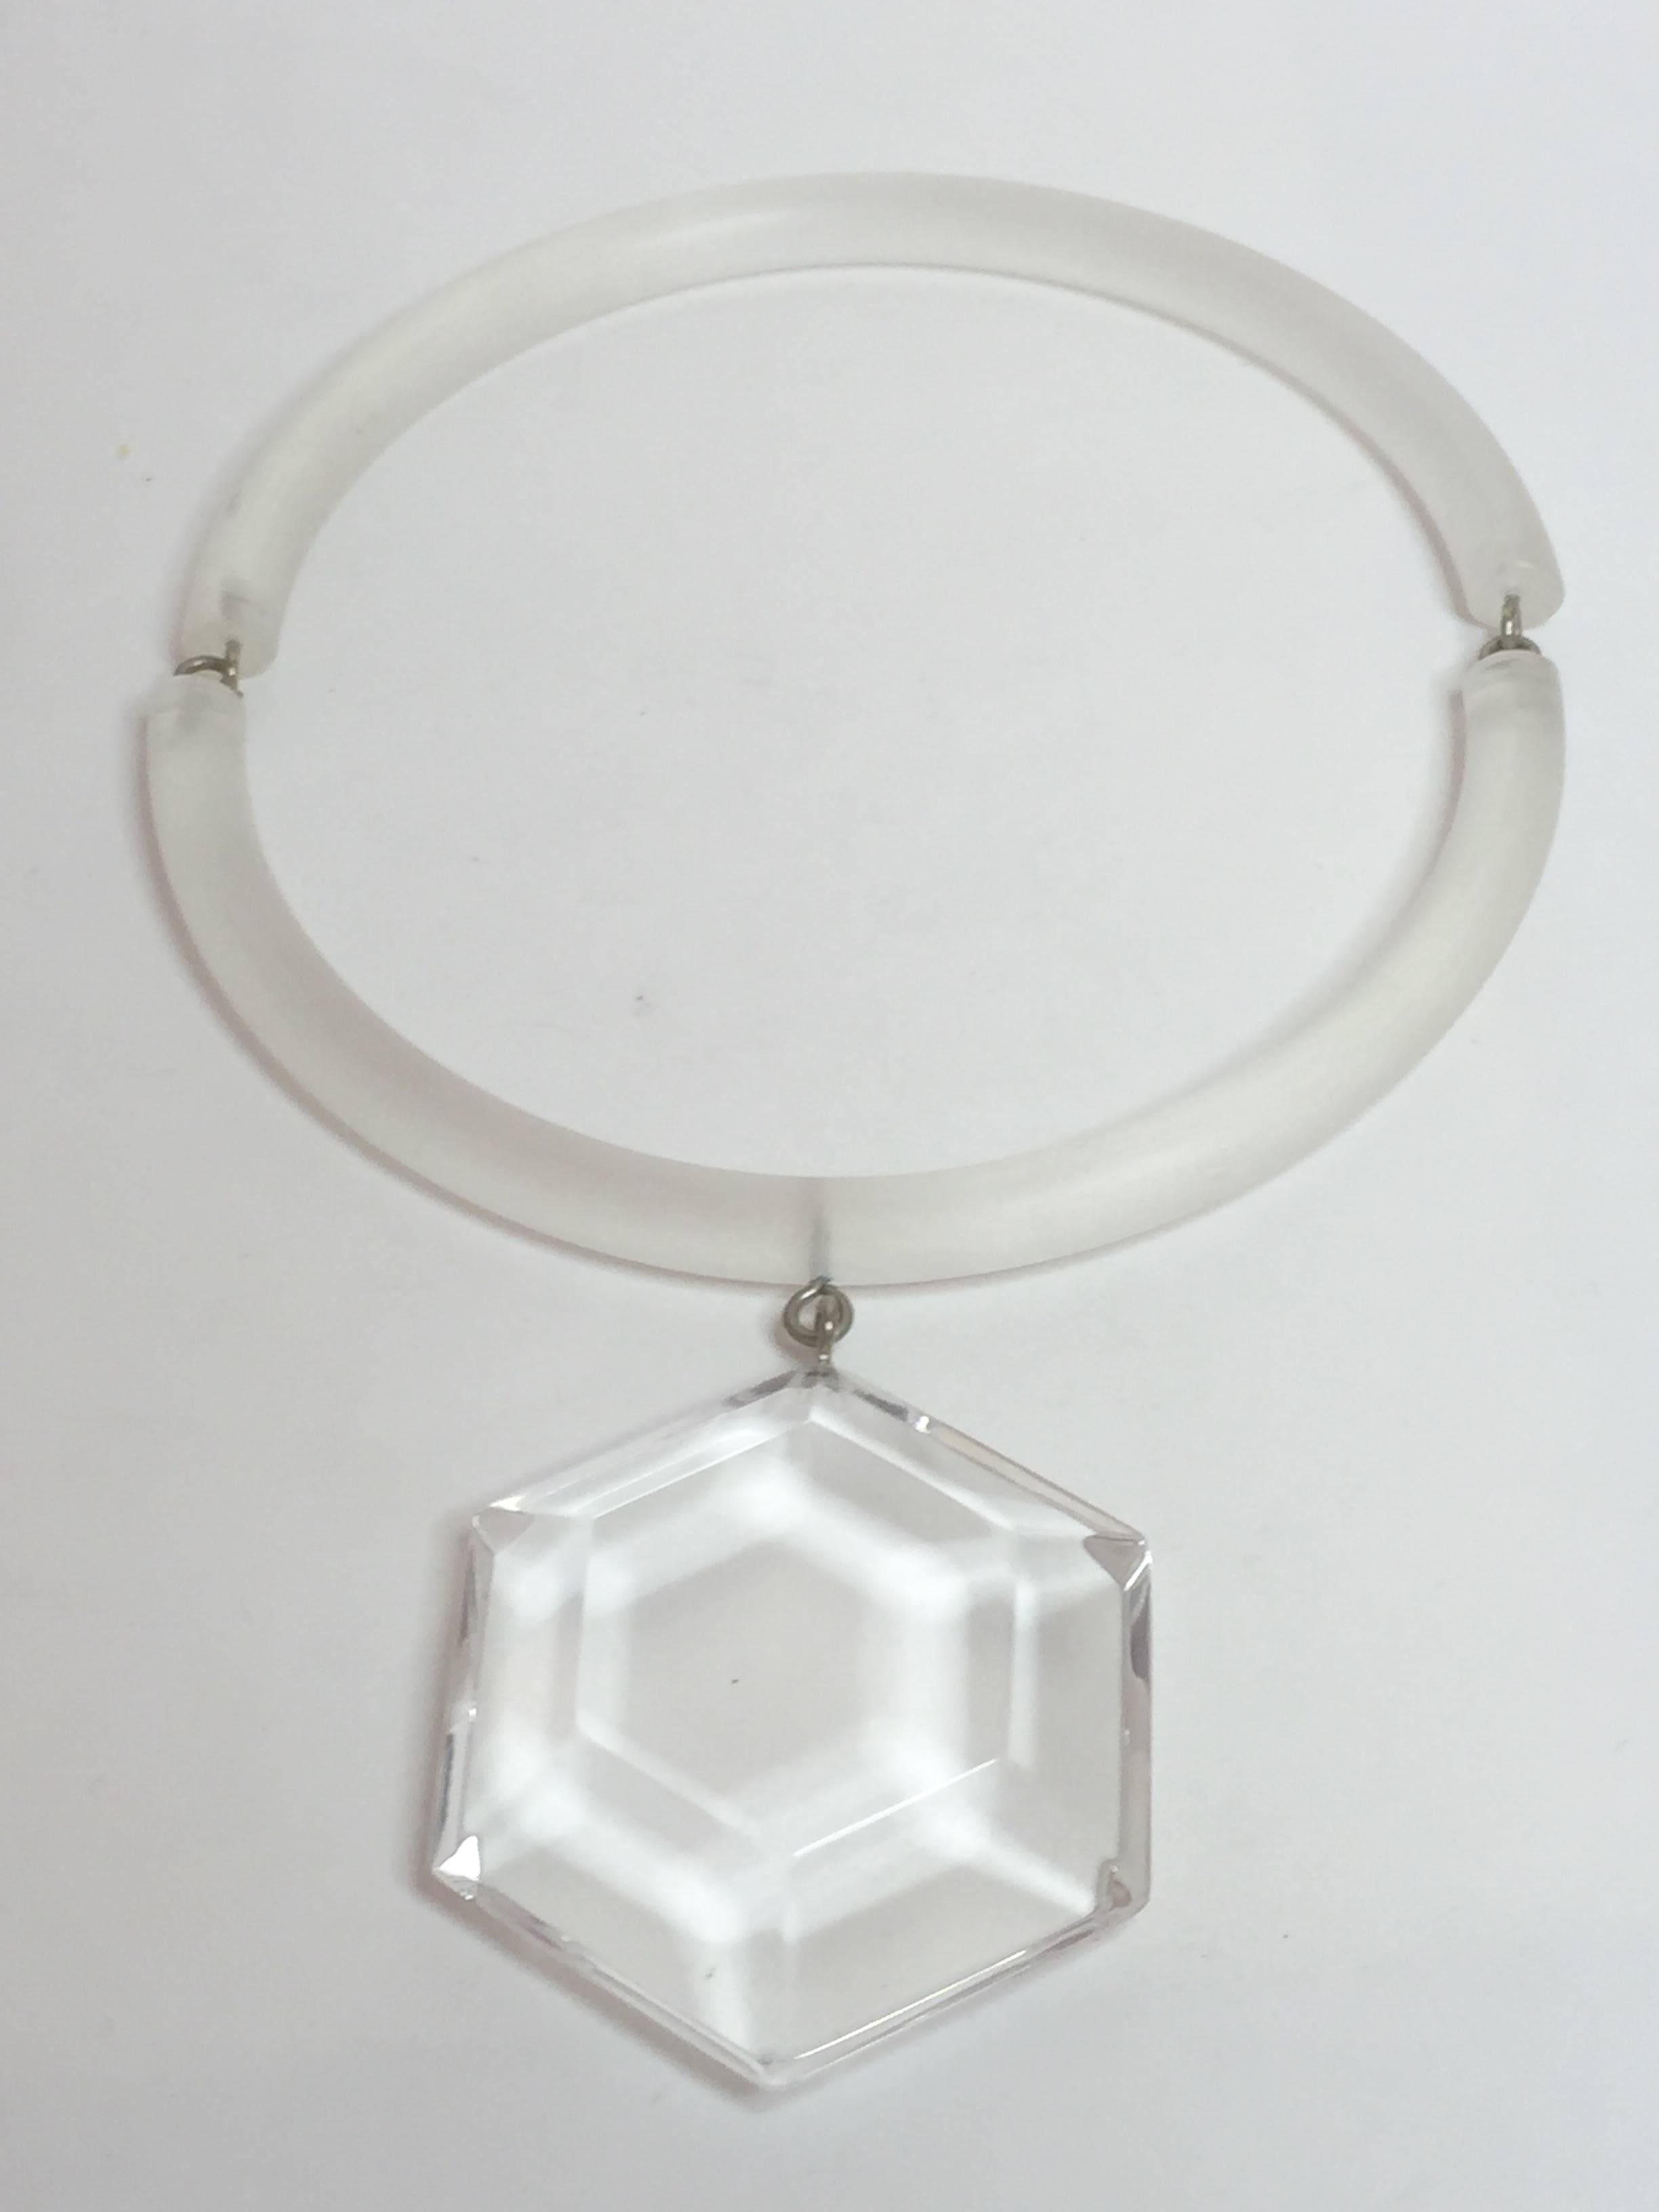 Lavish, luxe  and yet simple and elegant, this gorgeous frosted clear neck ring by Judith Hendler suspends a thick, chunky faceted hexagonal crystal colored acrylic pendant. Always worn with the closure on the wearer's left side, the O-ring and